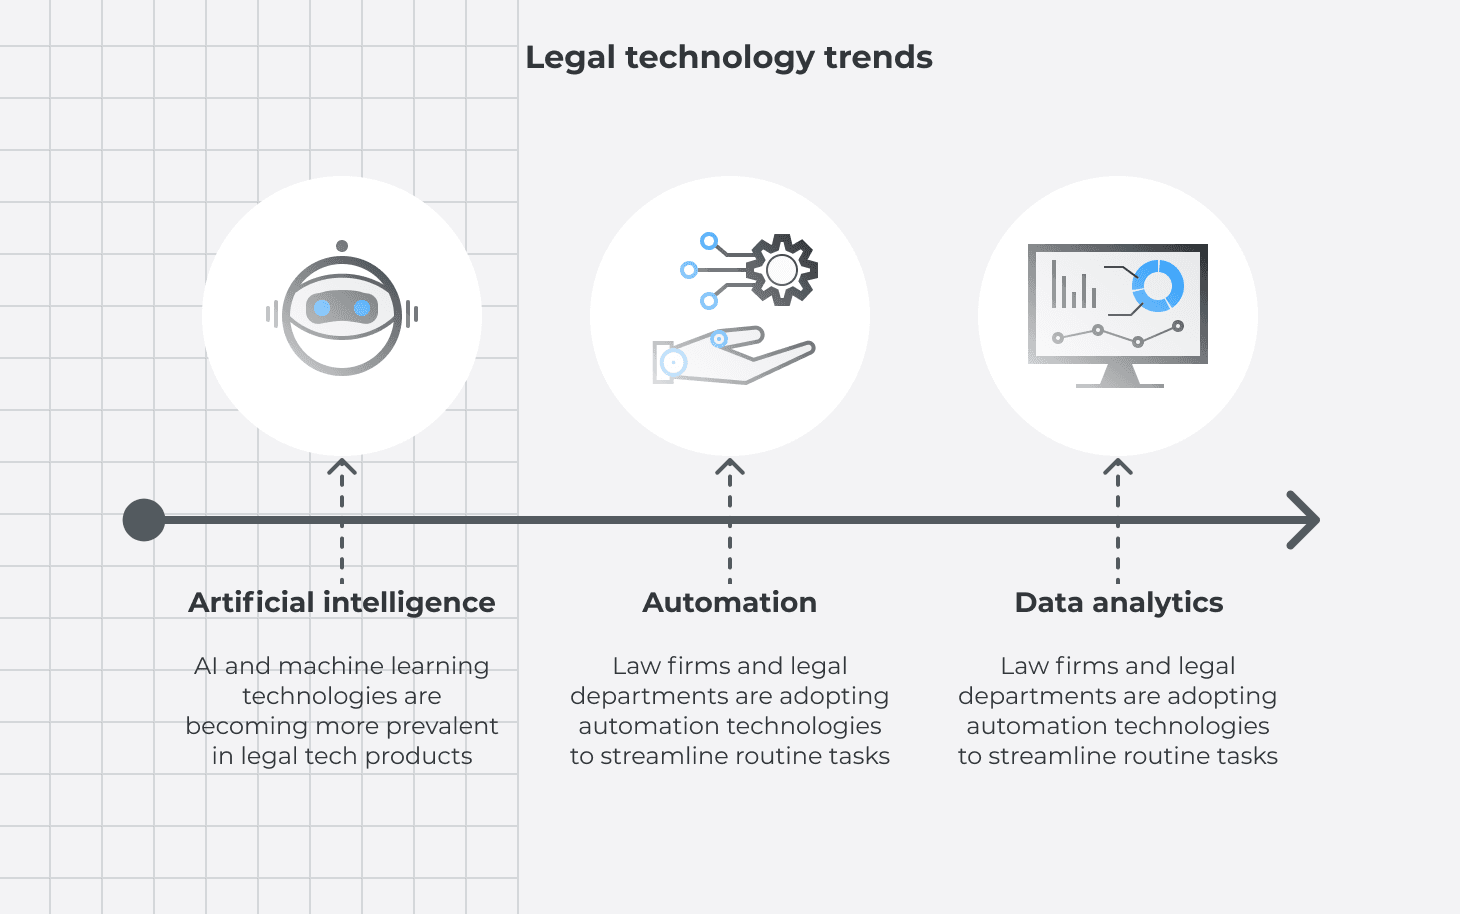 Top Legal Technology Trends